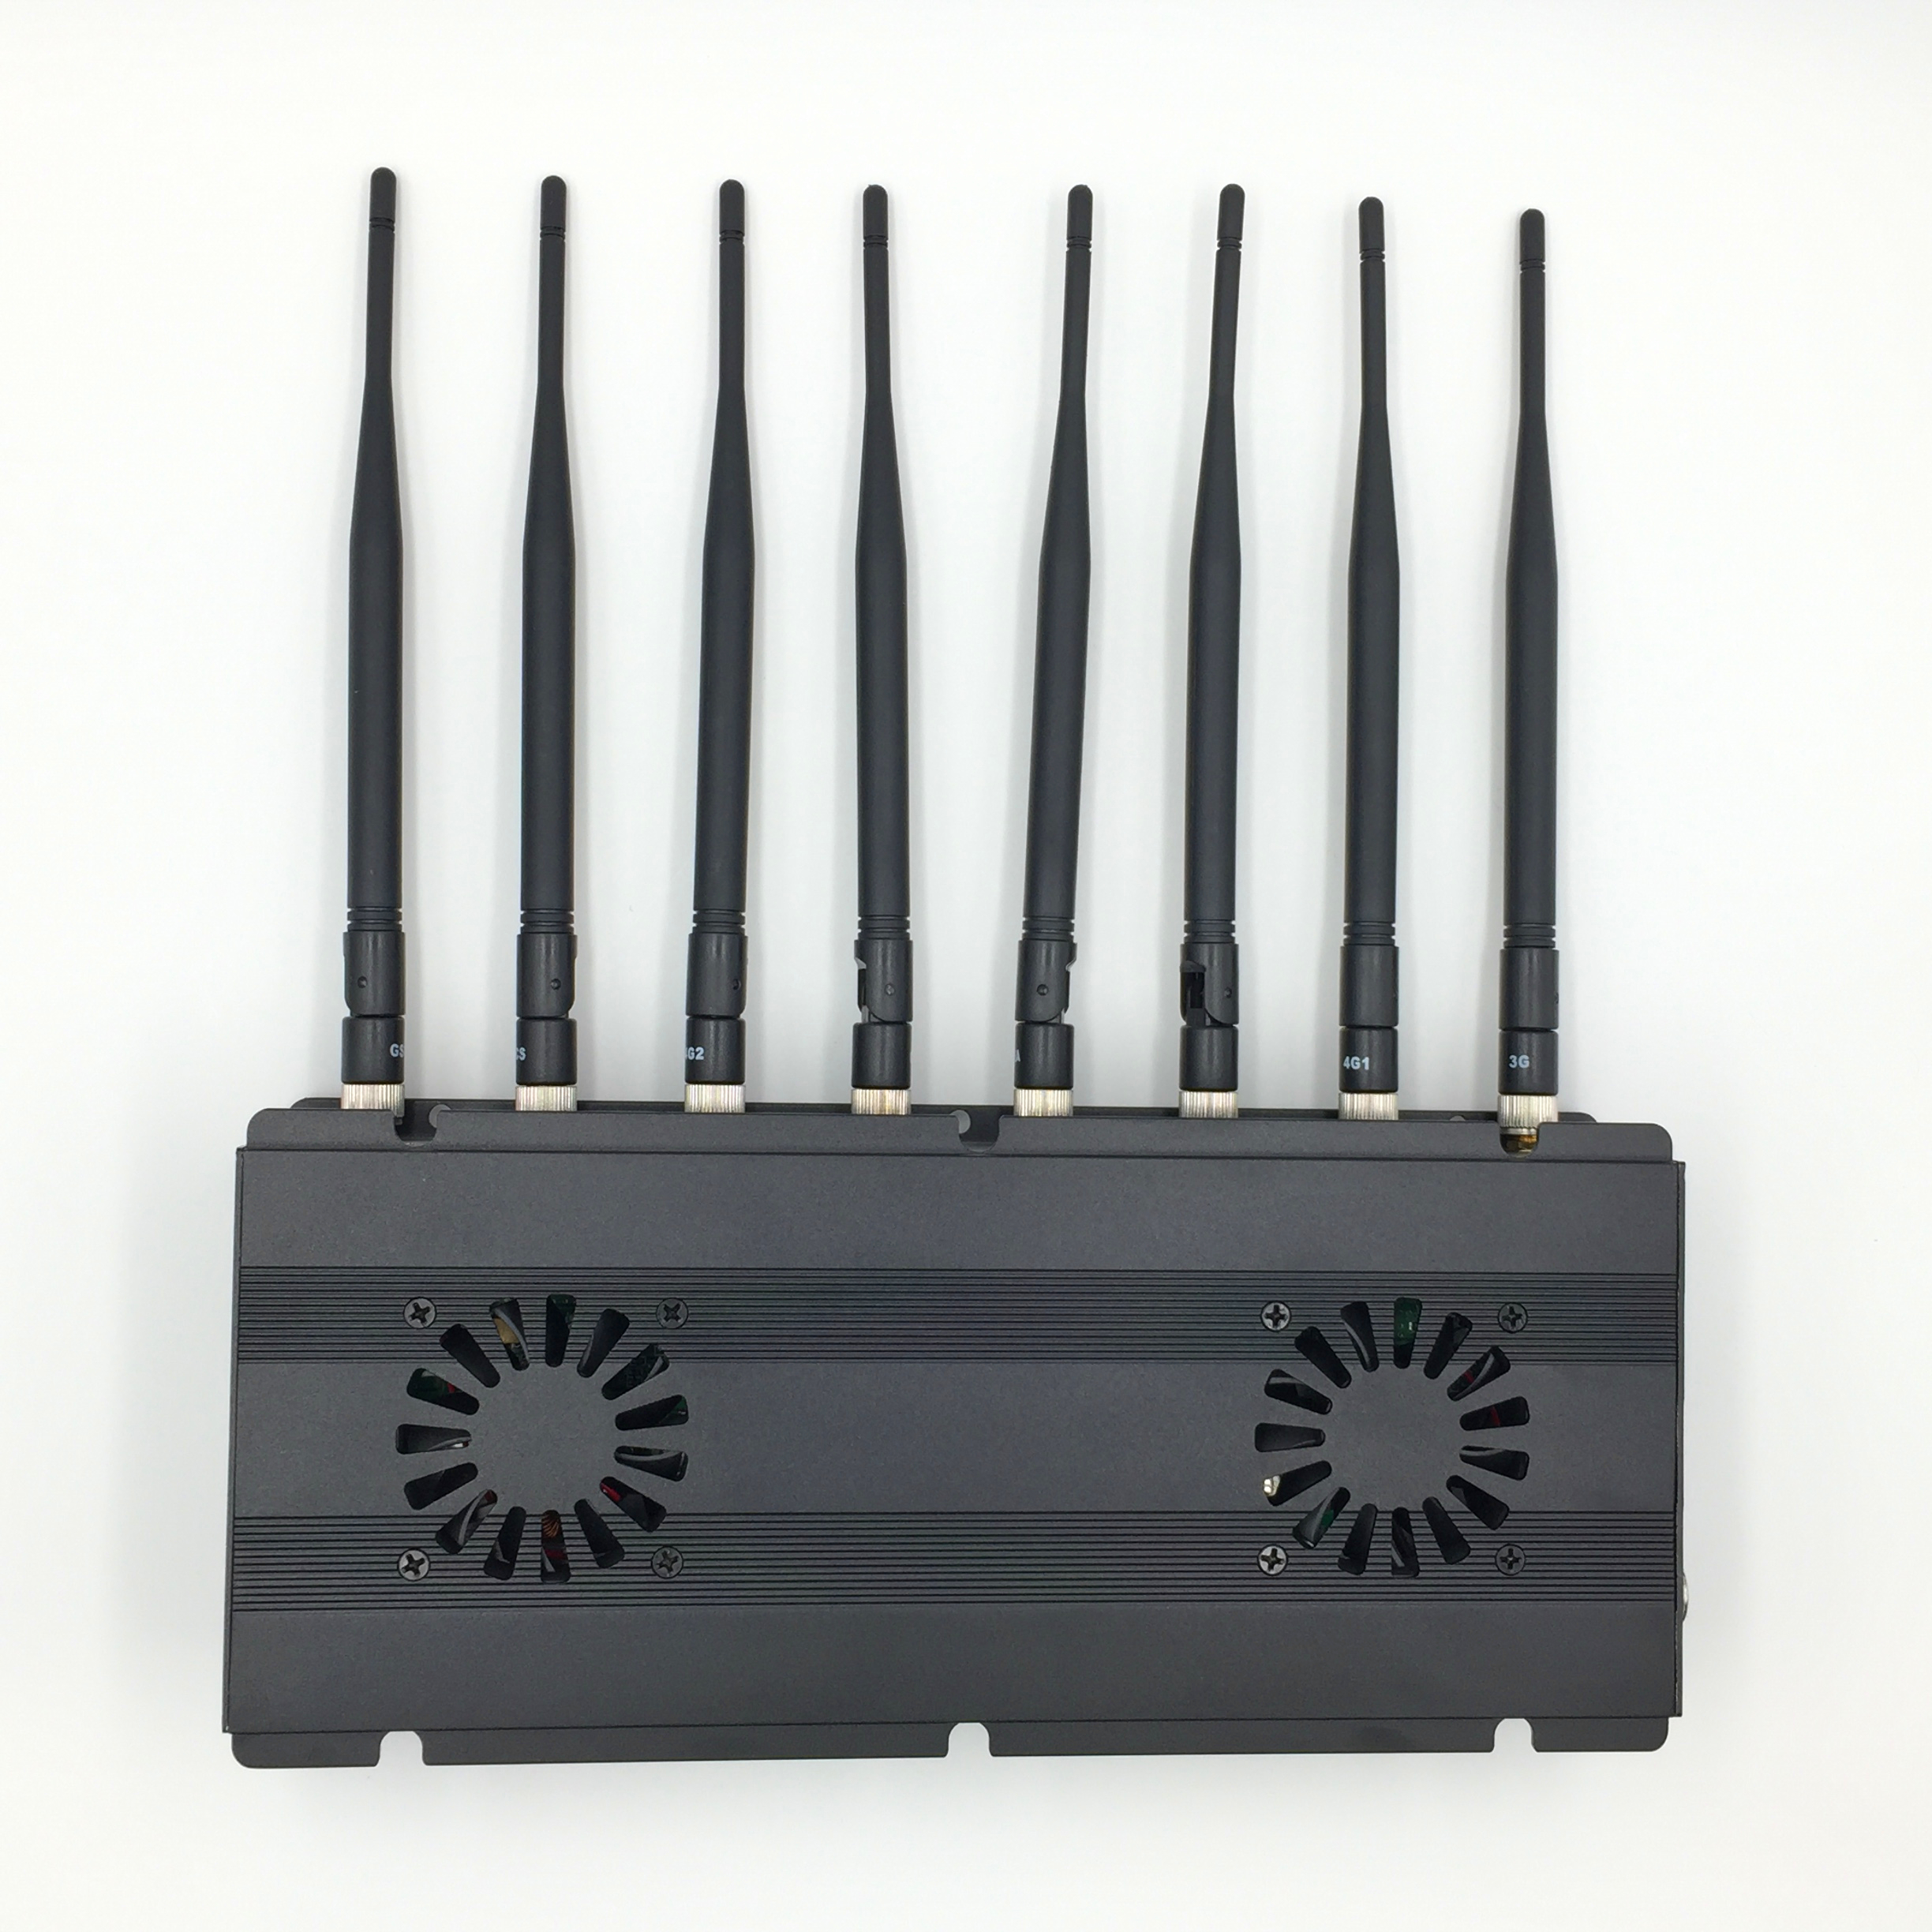 jammer legal entity vs , Black Desktop 8 Antenna Signal Jammers With GSM 3G 4G GPS WiFi LOJACK